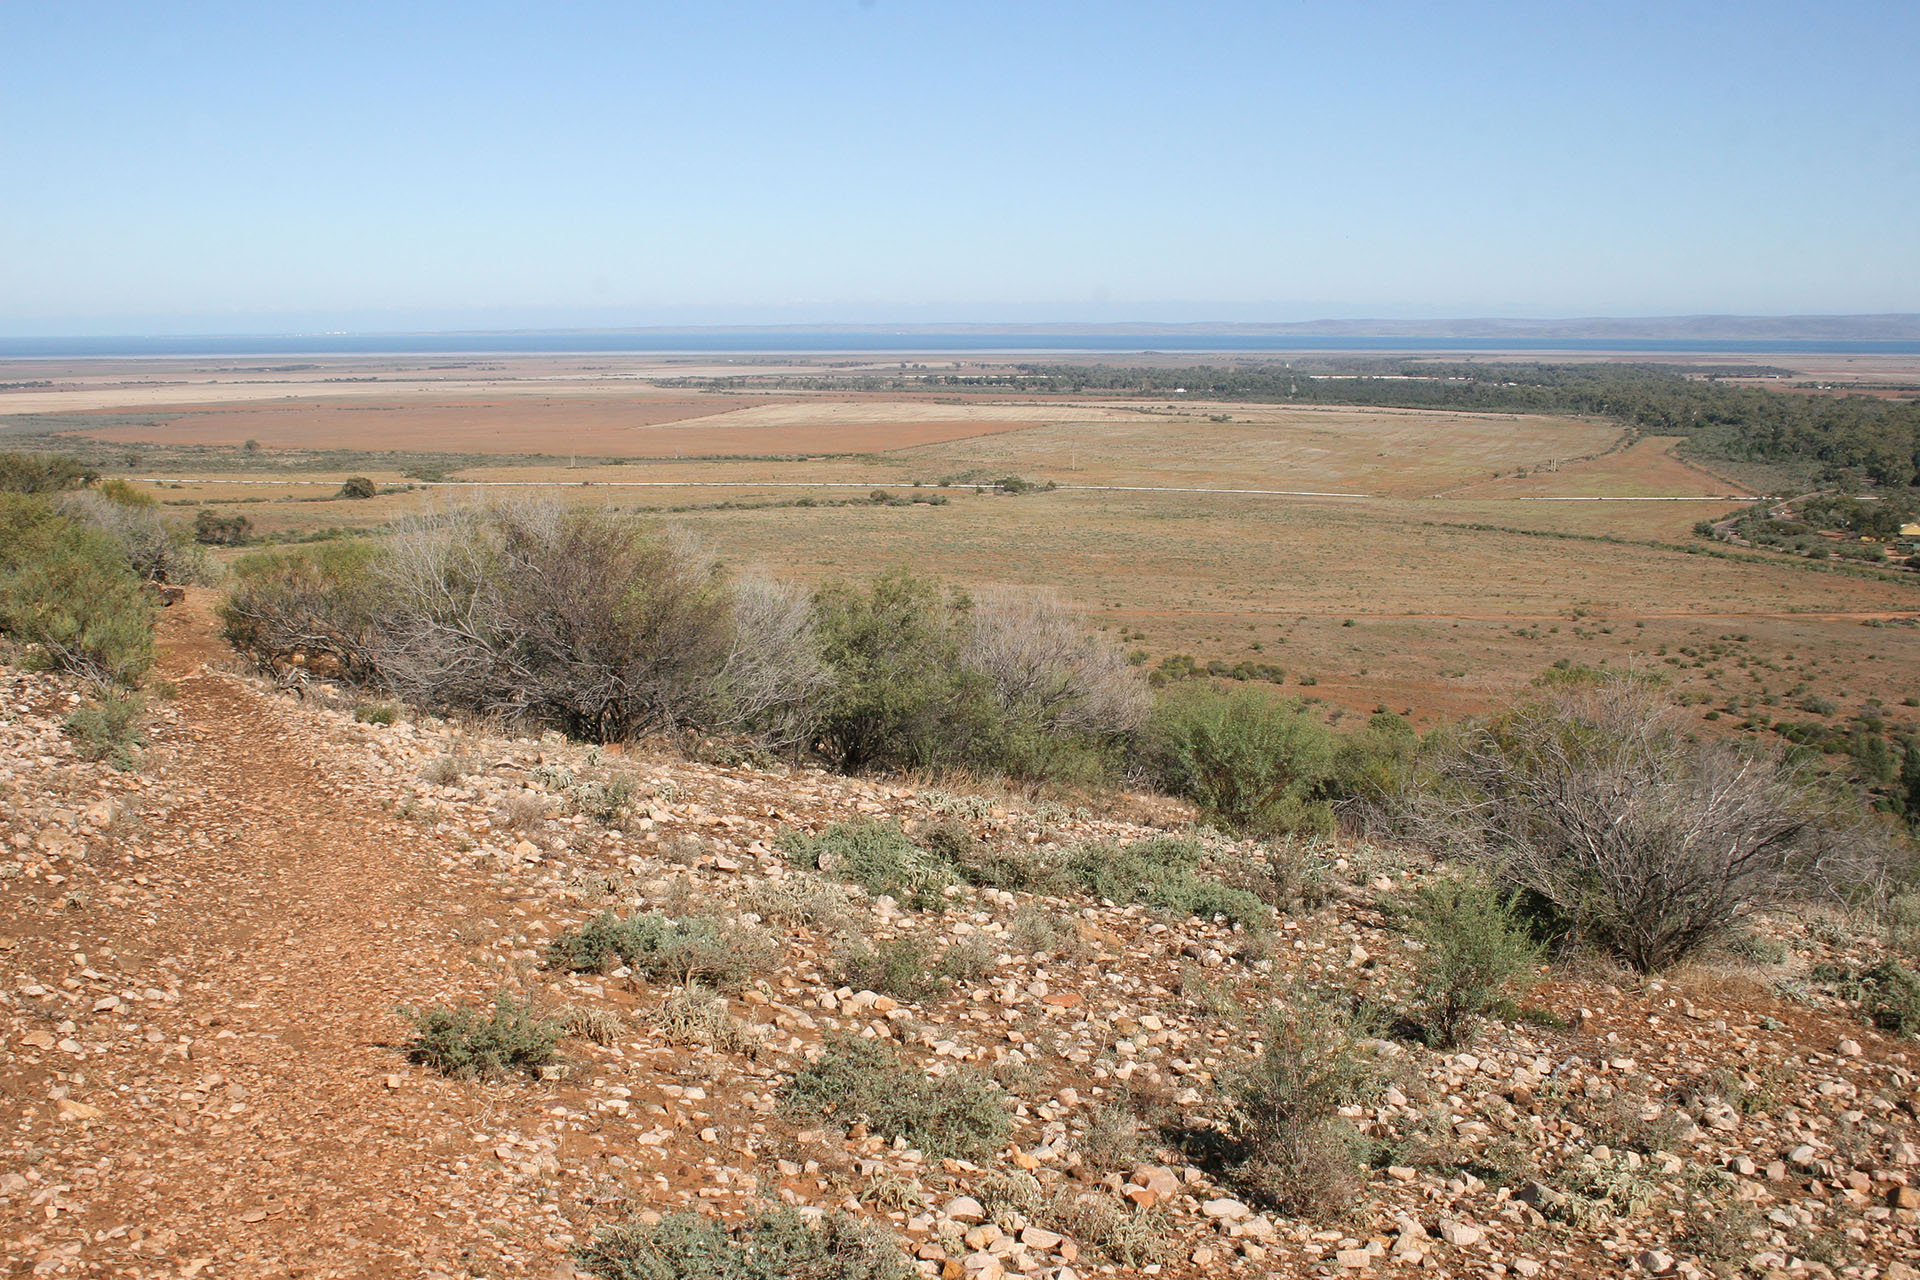 Spencer Gulf is right over there, and so is the Eyre Peninsula.